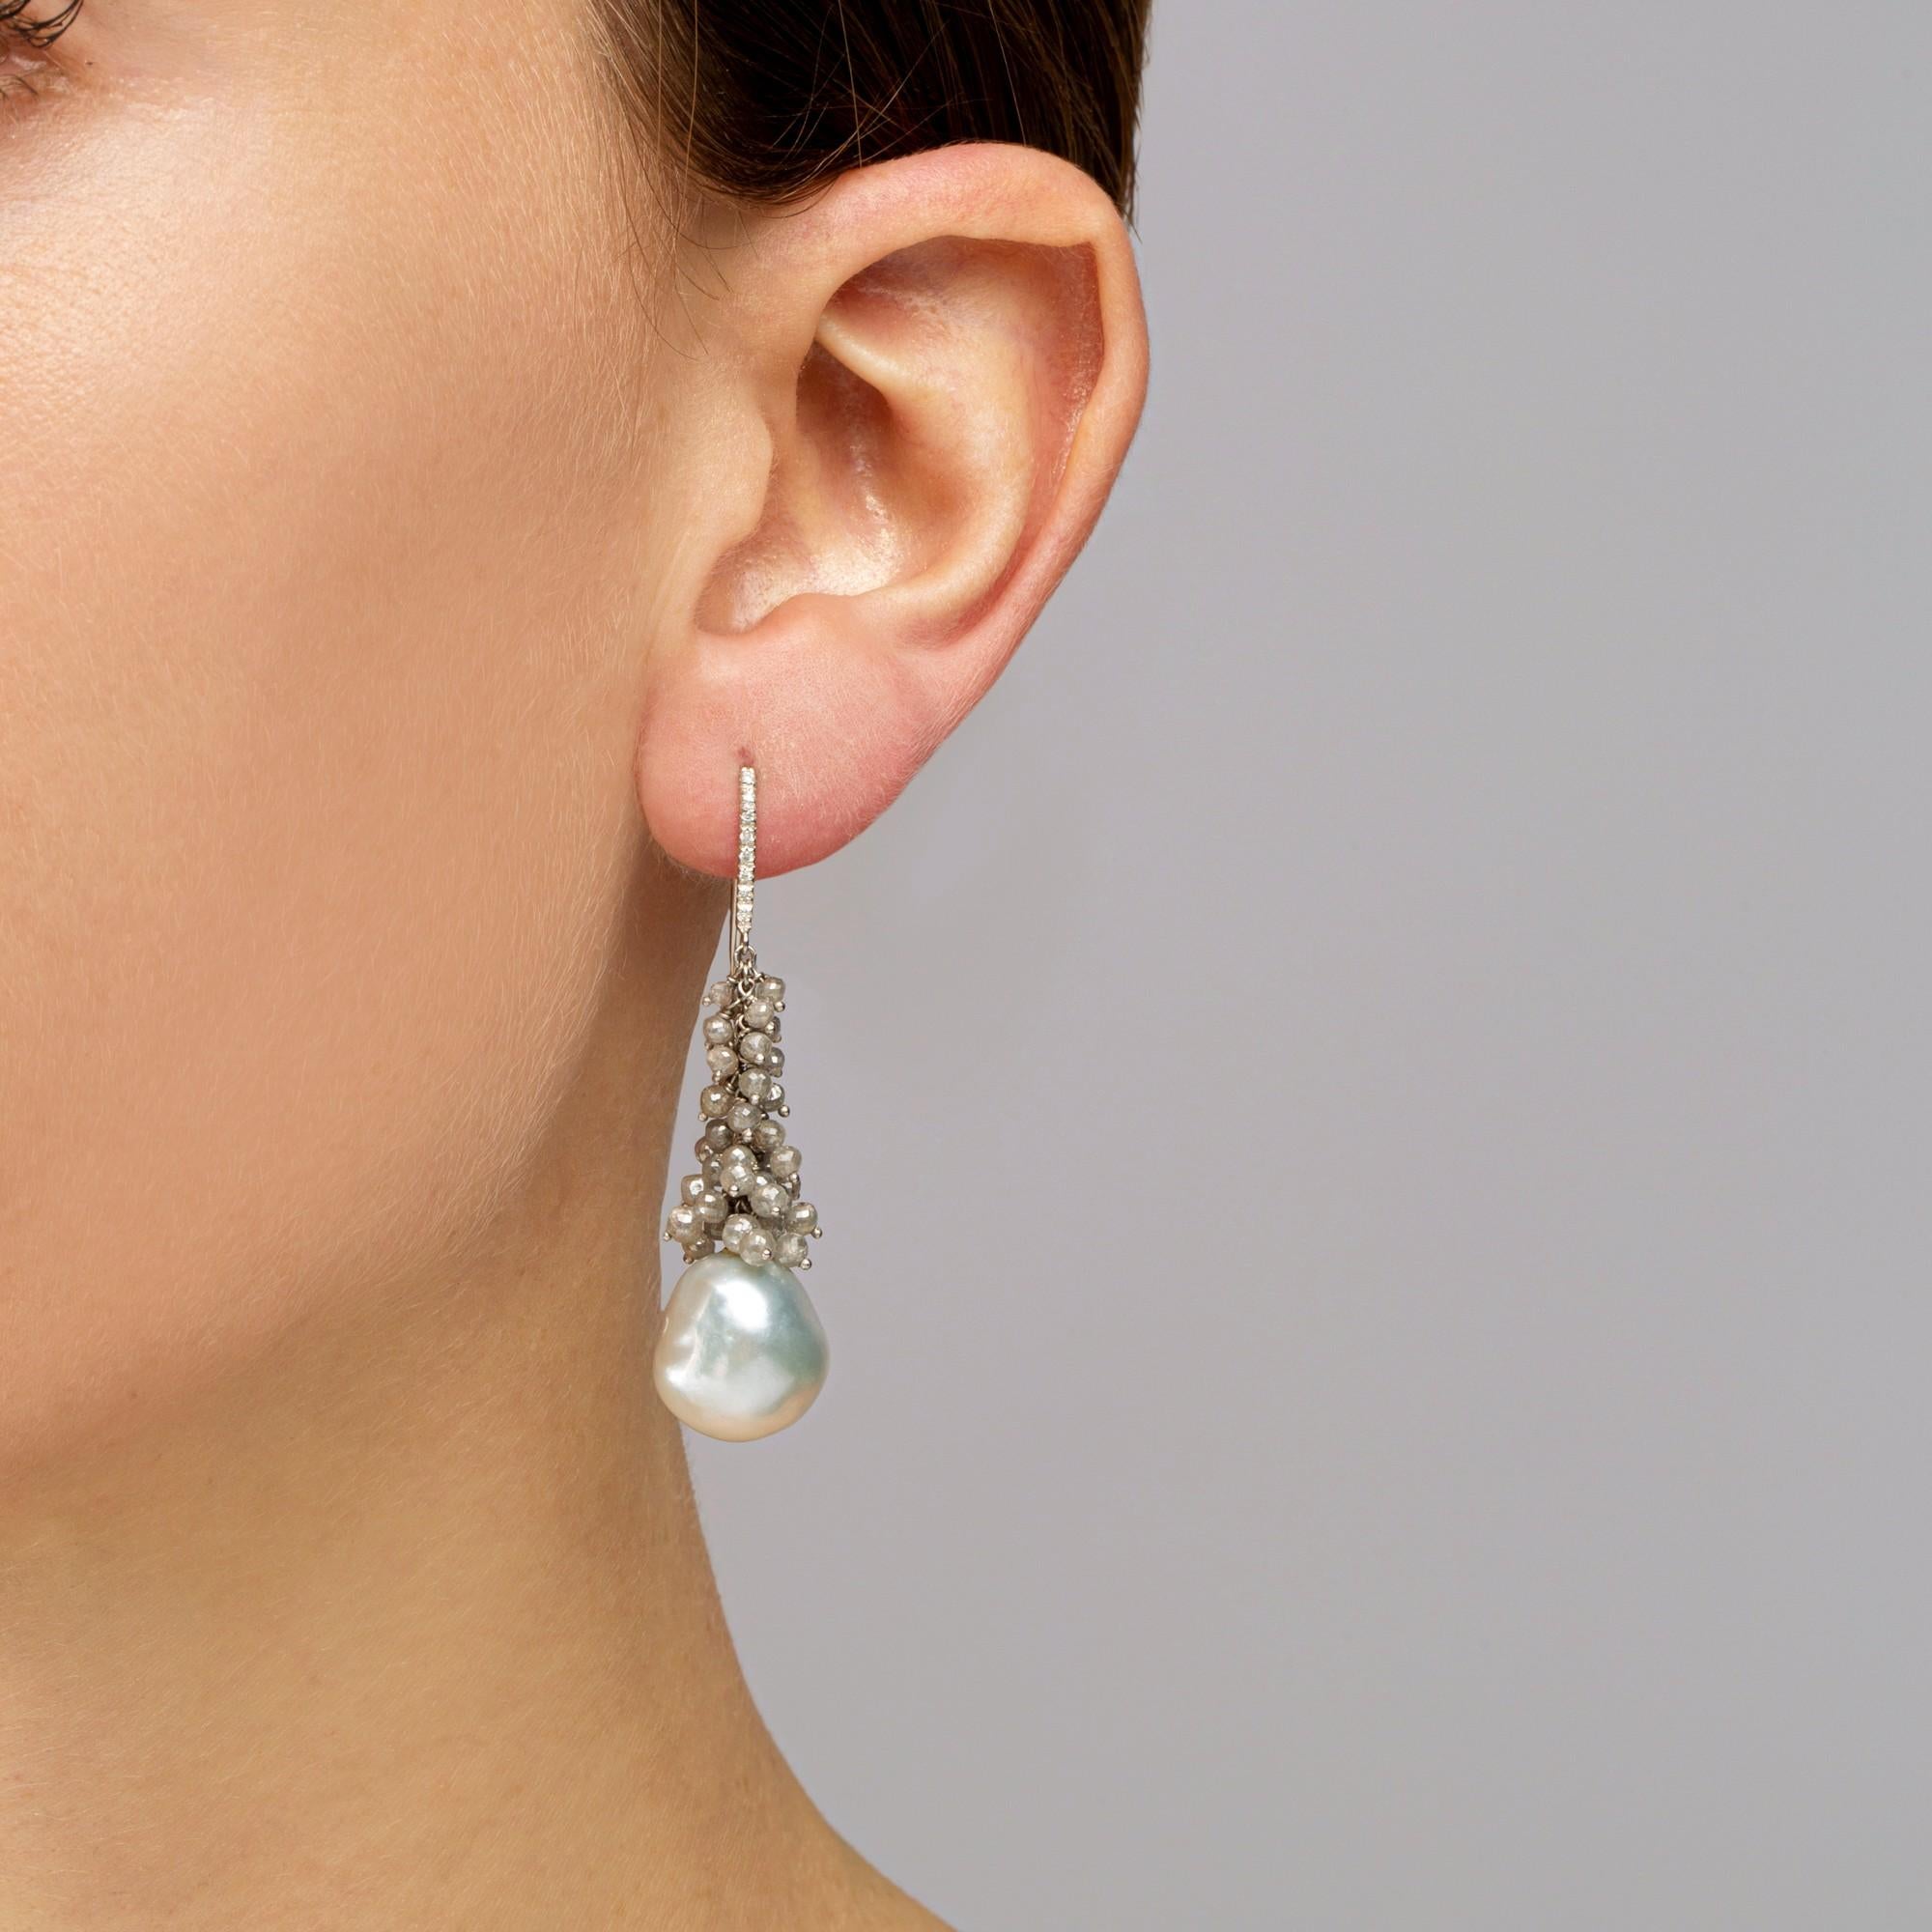 Alex Jona one-of-a-kind design collection, hand crafted in Italy, 18 karat white gold dangle earrings, showcasing two natural light grey Tahiti baroque pearls, suspended from 13.30 carats of briolette cut ice diamonds and 0.10 carats of white